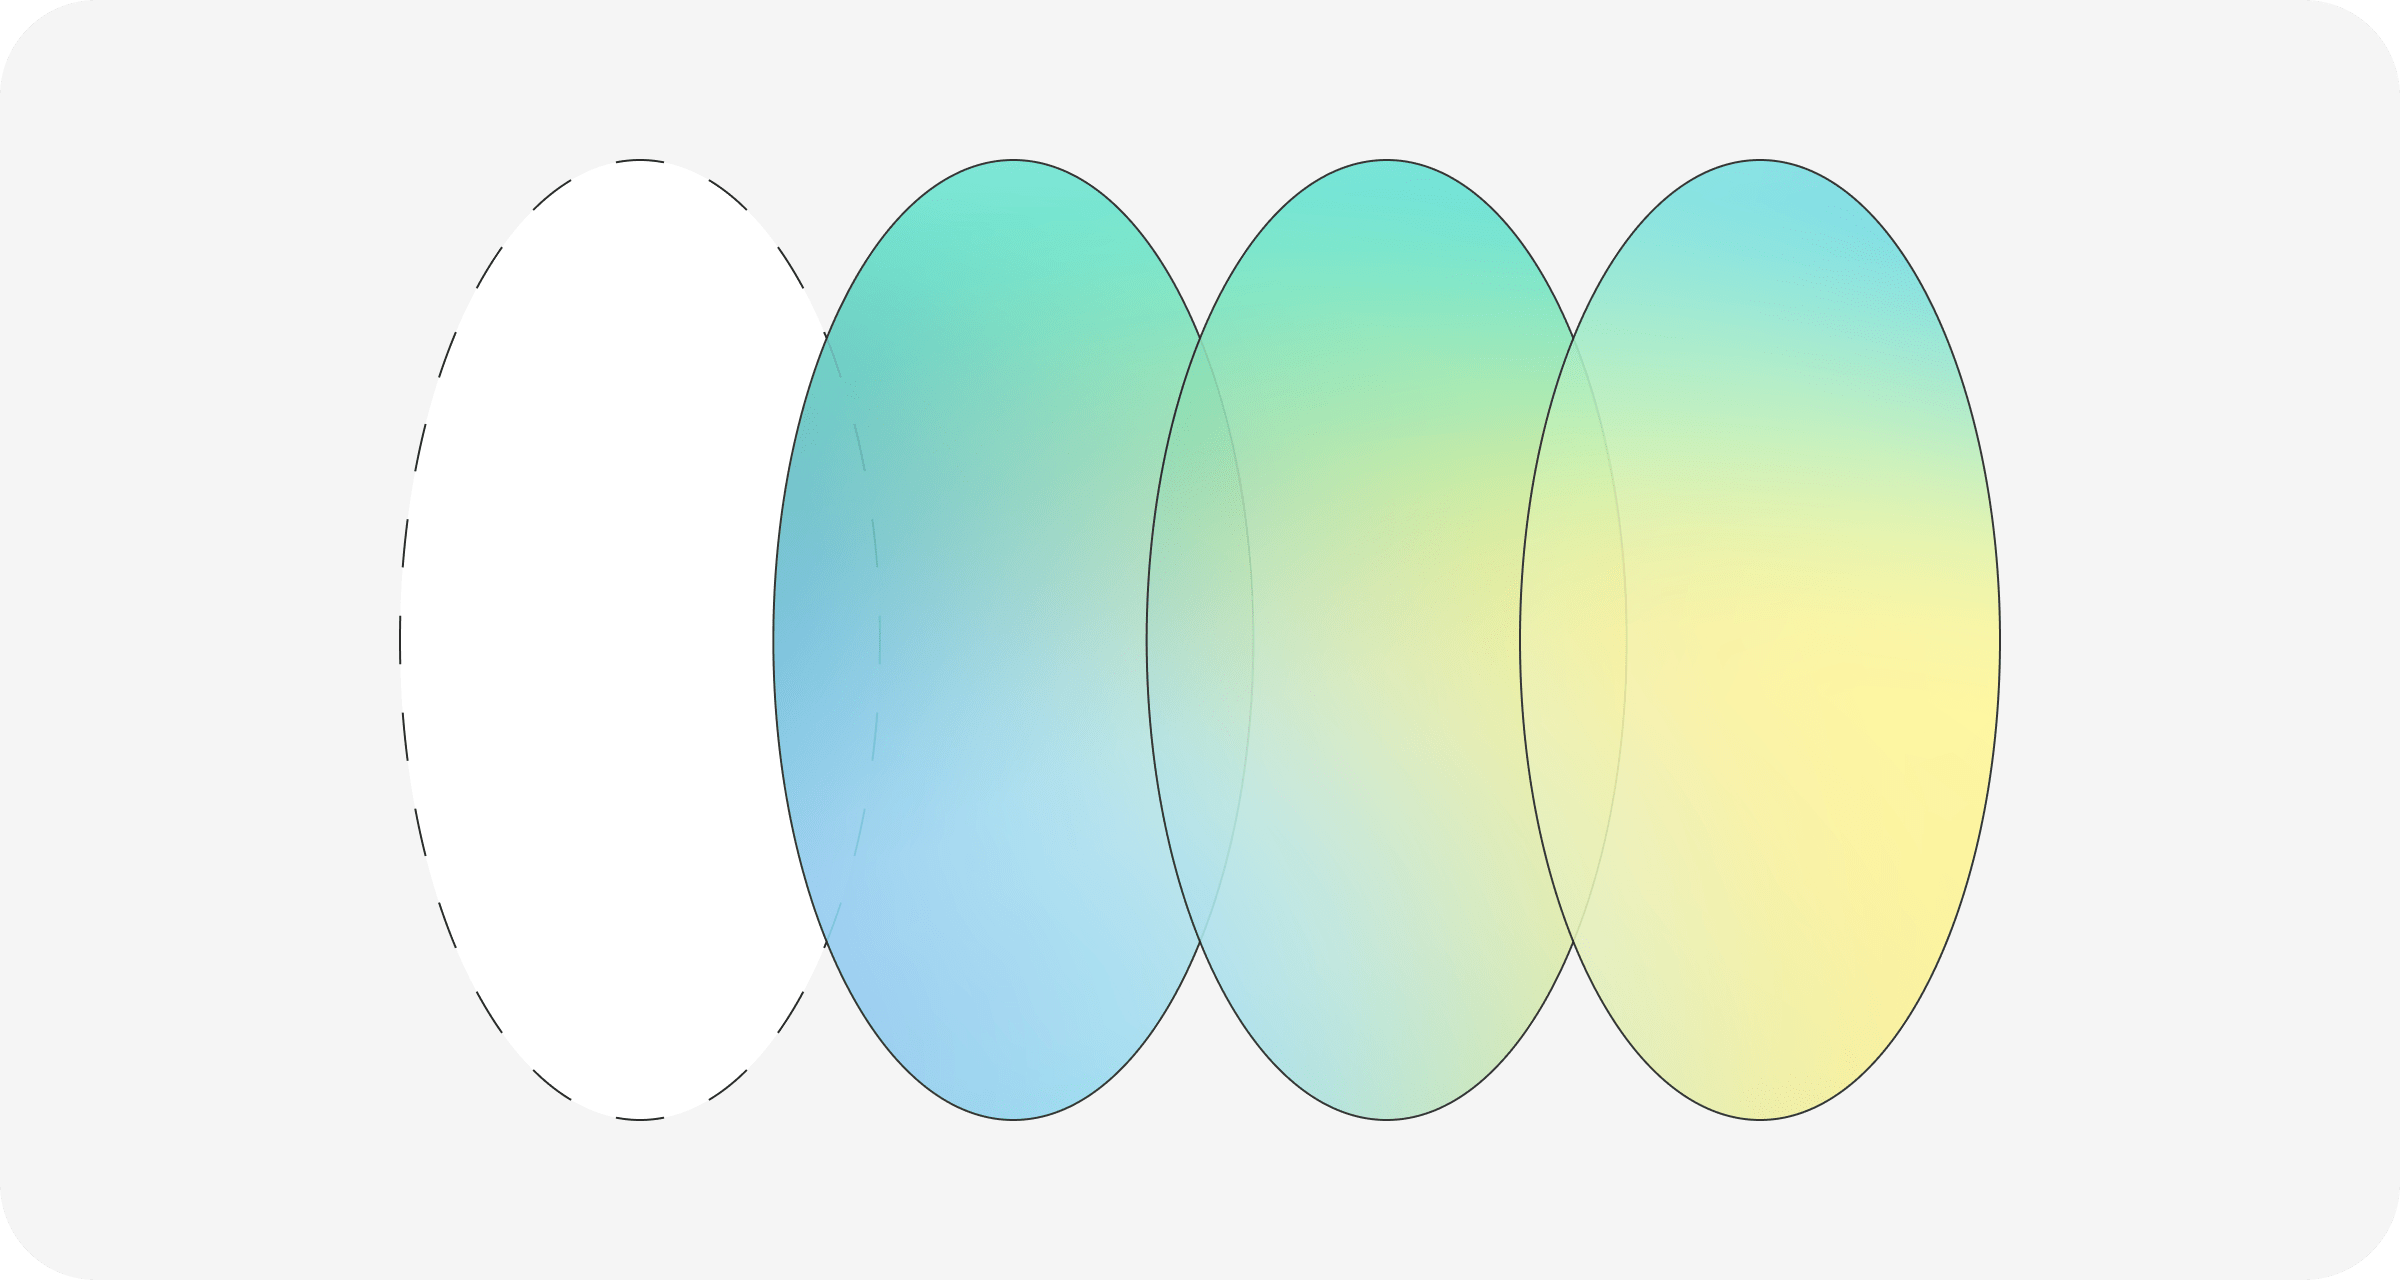 Overlapping ovals depicting additionality